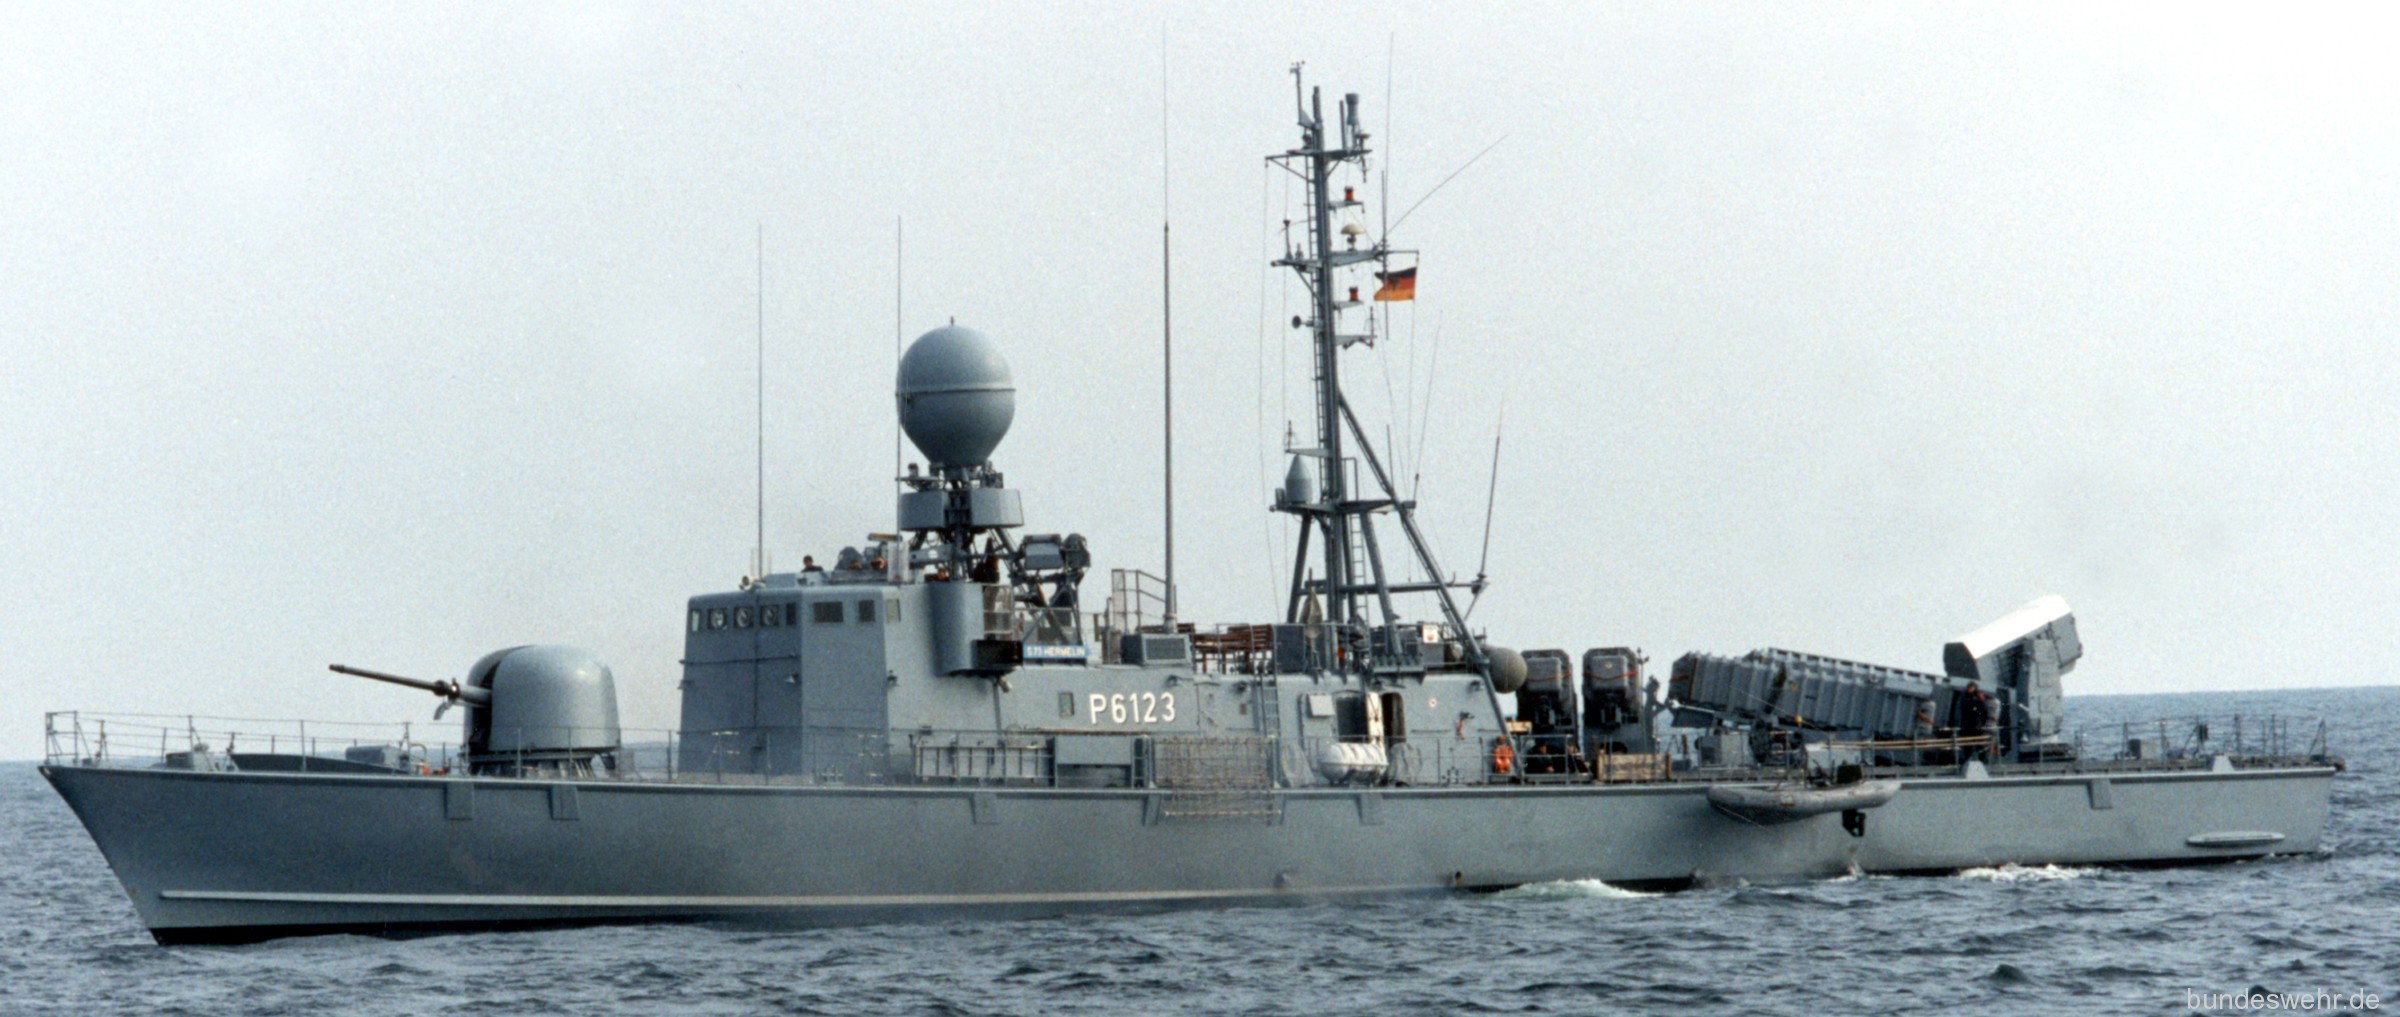 p6123 s73 fgs hermelin type 143a gepard class fast attack missile craft german navy 06